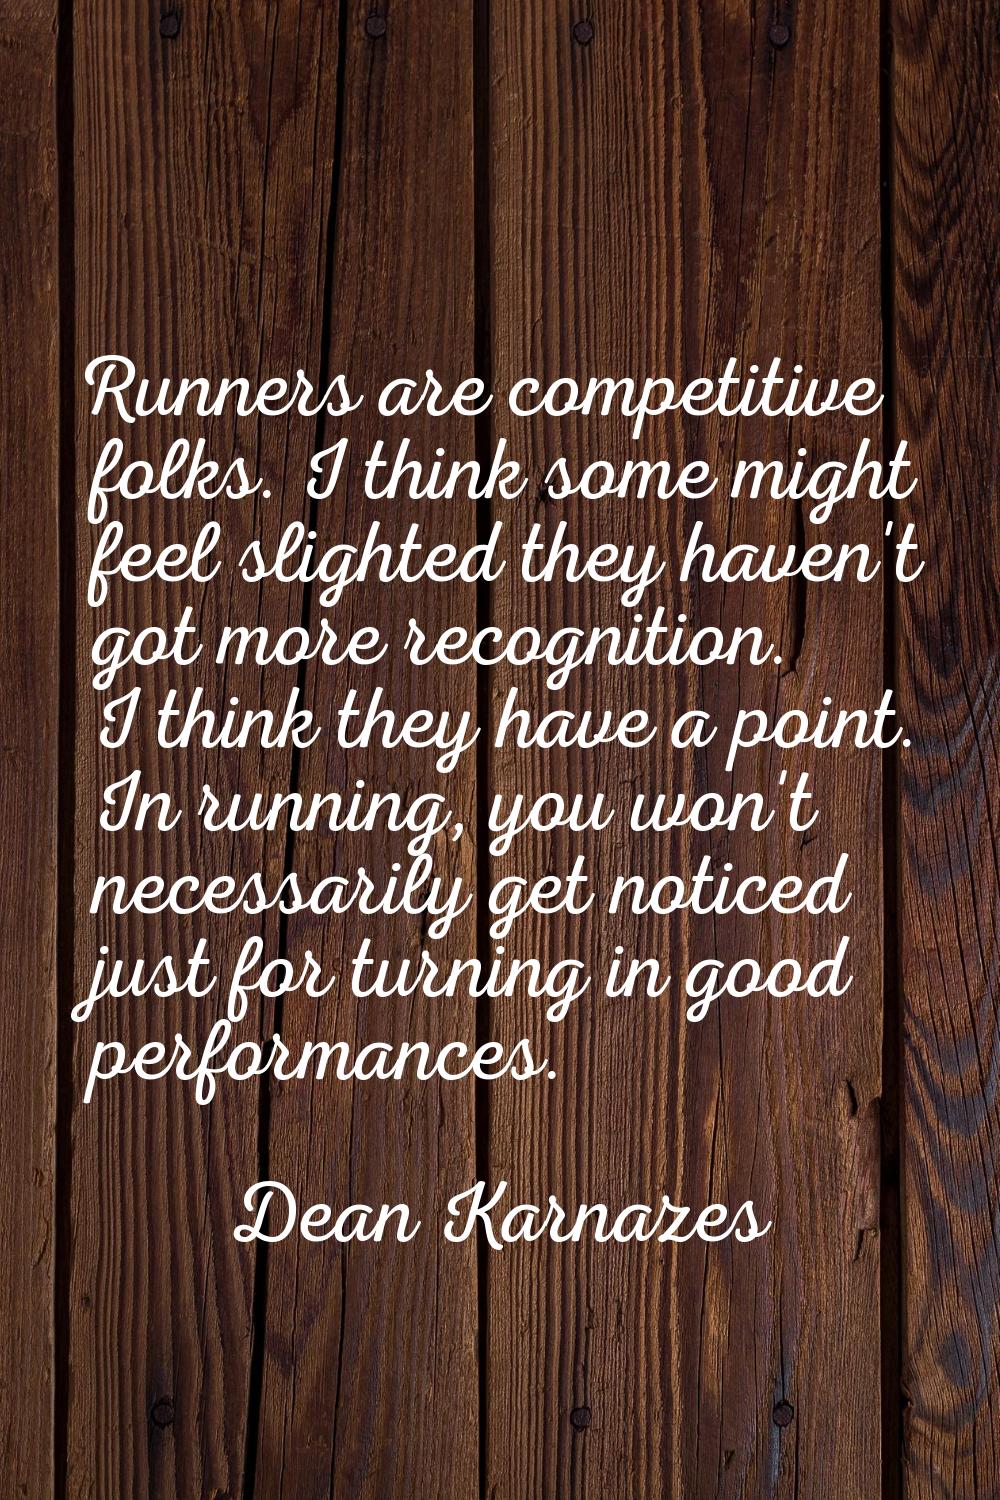 Runners are competitive folks. I think some might feel slighted they haven't got more recognition. 